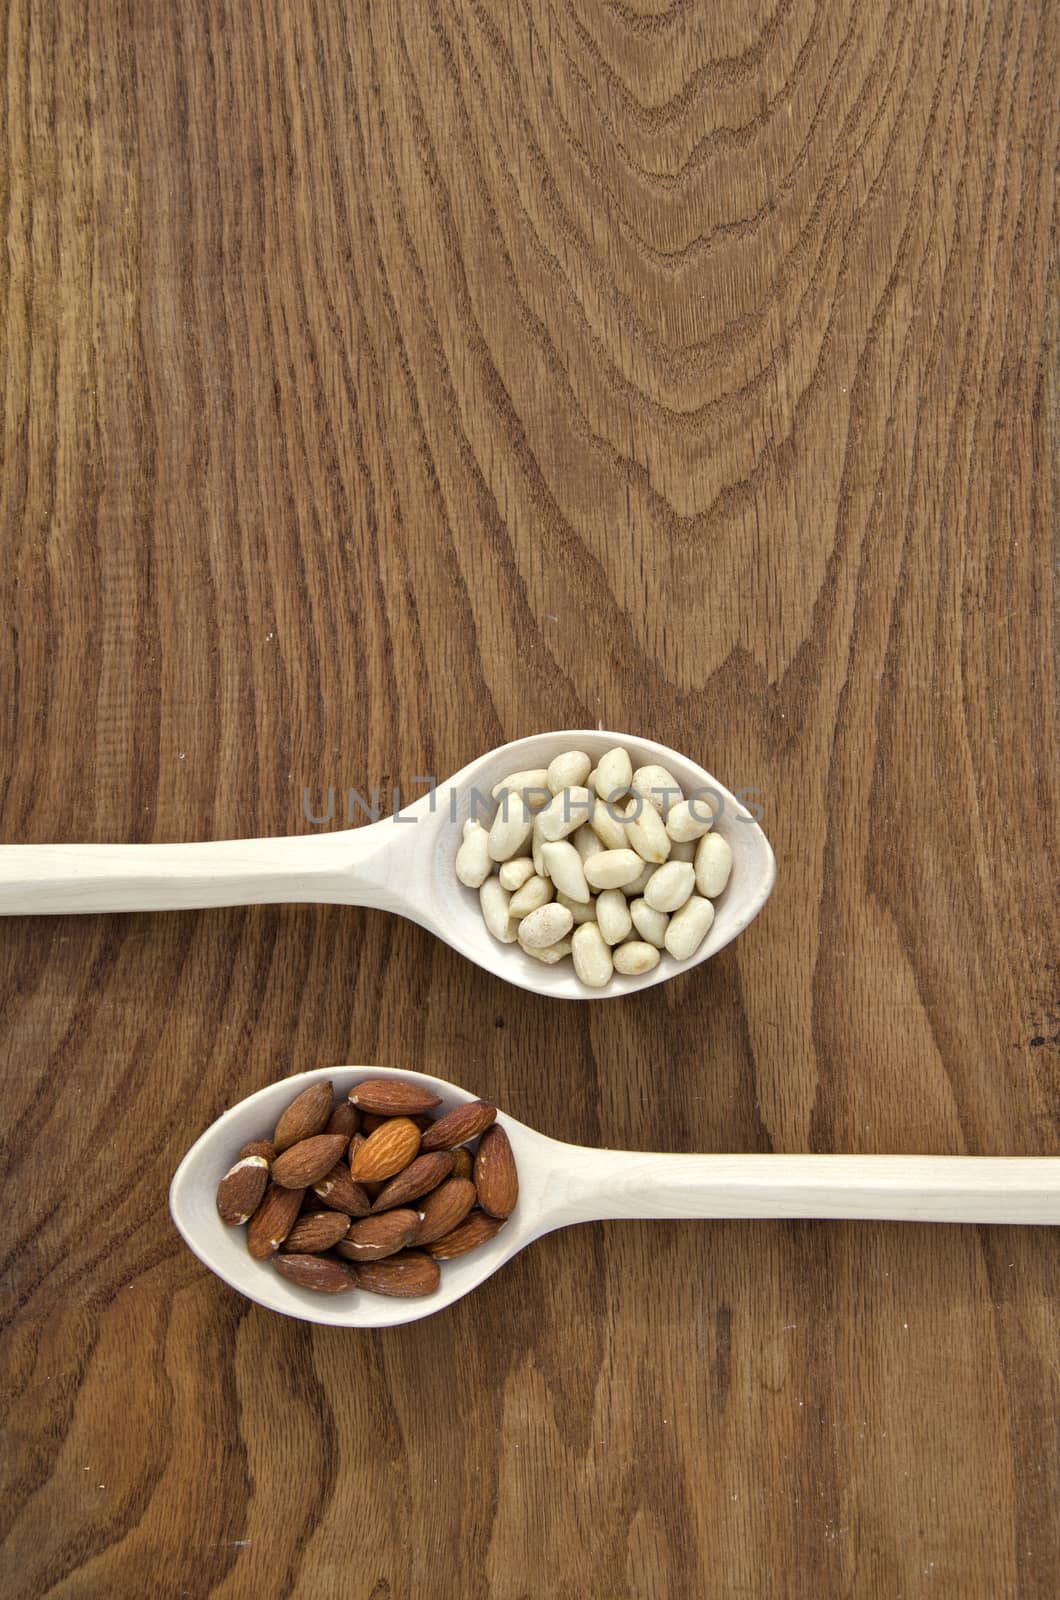 nuts in new wooden spoons on oak plank background. Healthy food